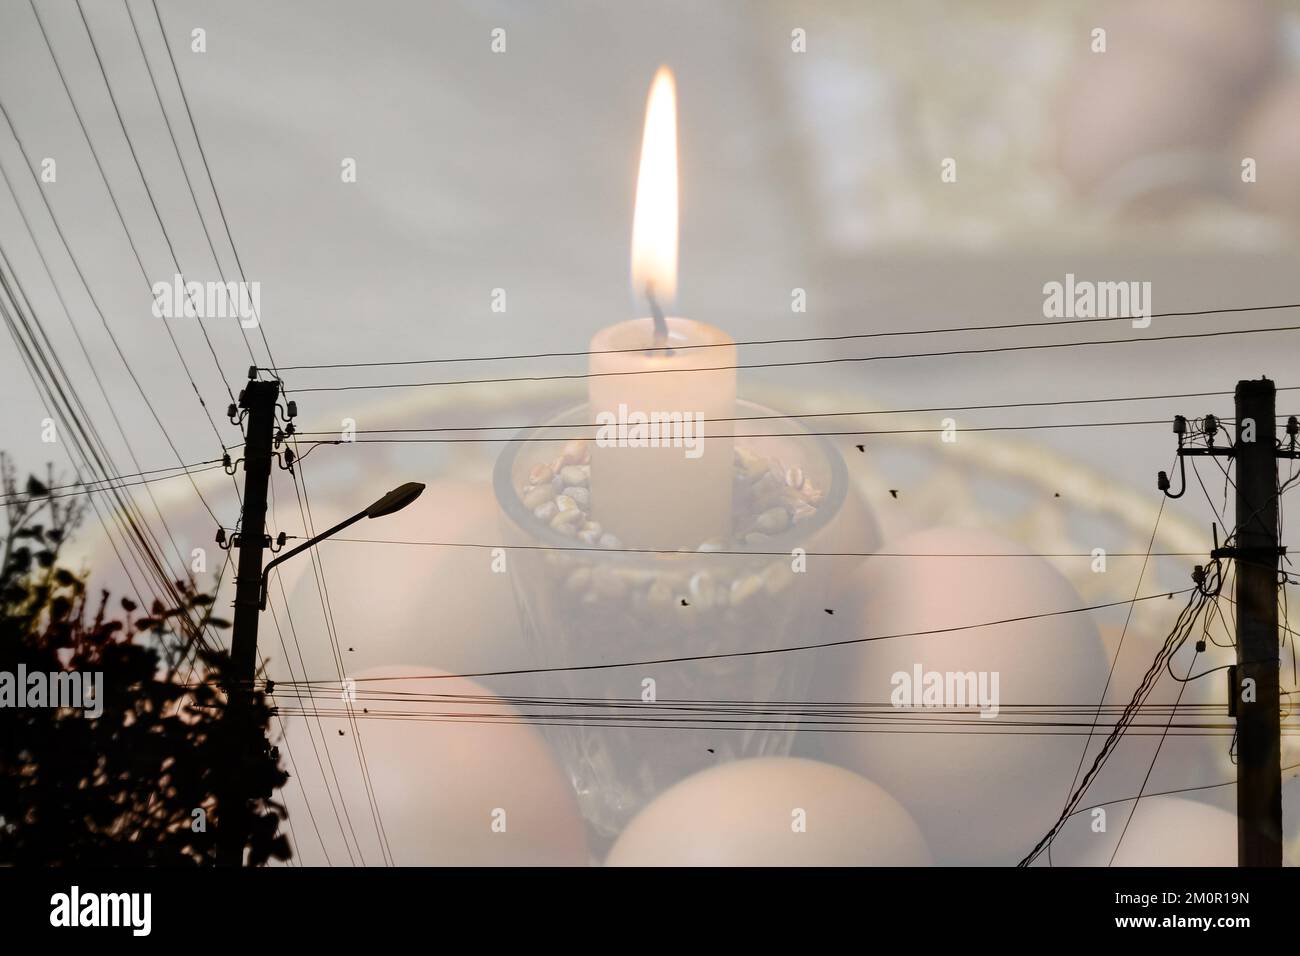 Blackout, power grid overloaded. Blackout concept. Earth hour. Burning flame candle and power lines on background. Energy crisis. Candle flame. Stock Photo